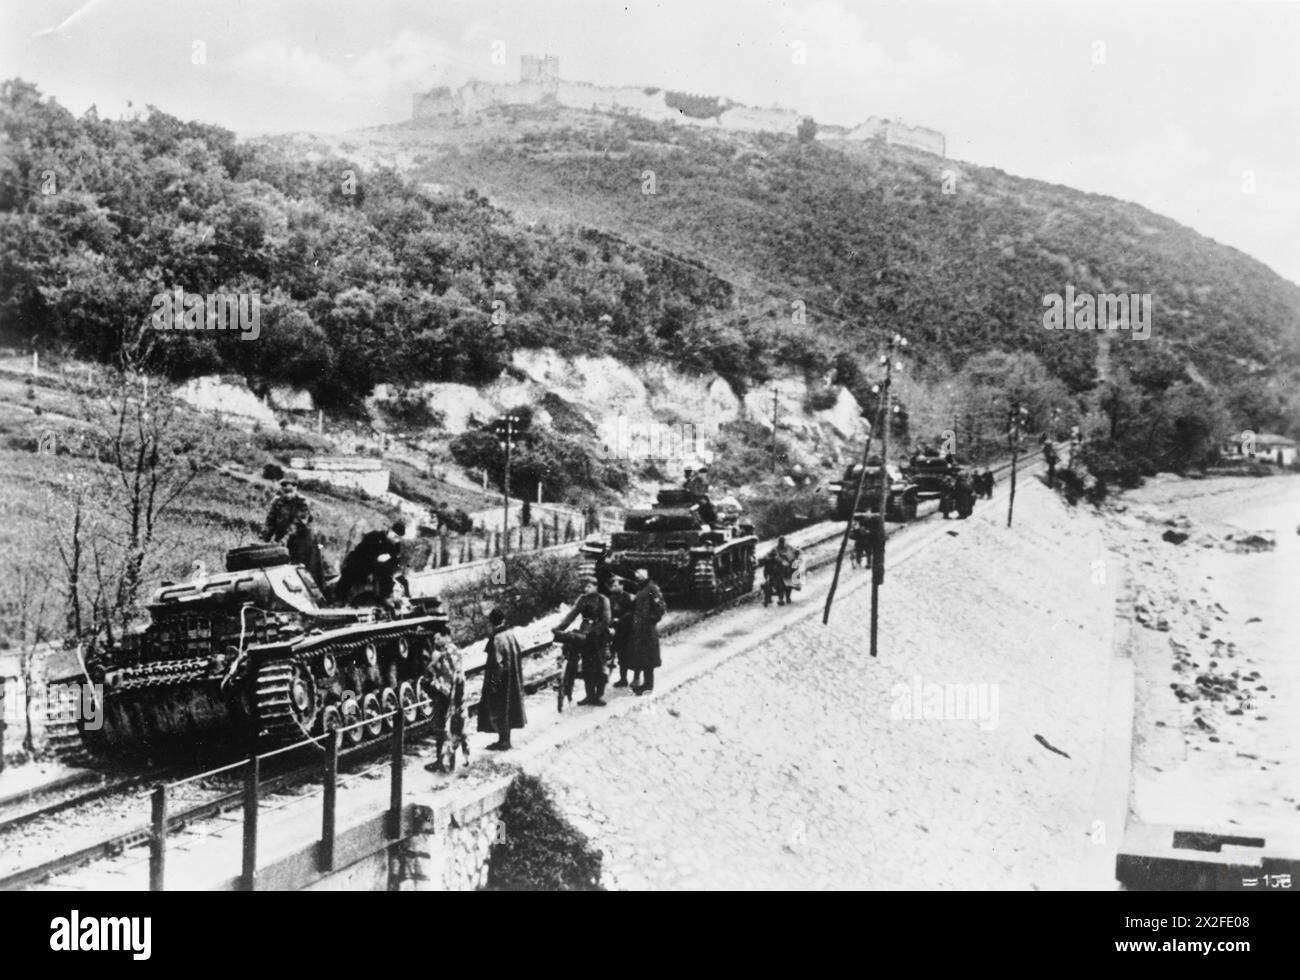 THE GERMAN INVASION OF GREECE, APRIL 1941 - German Panzer III tanks advance along a railway line in pursuit of retreating British troops in Greece between 25 and 30 April 1941 German Army Stock Photo